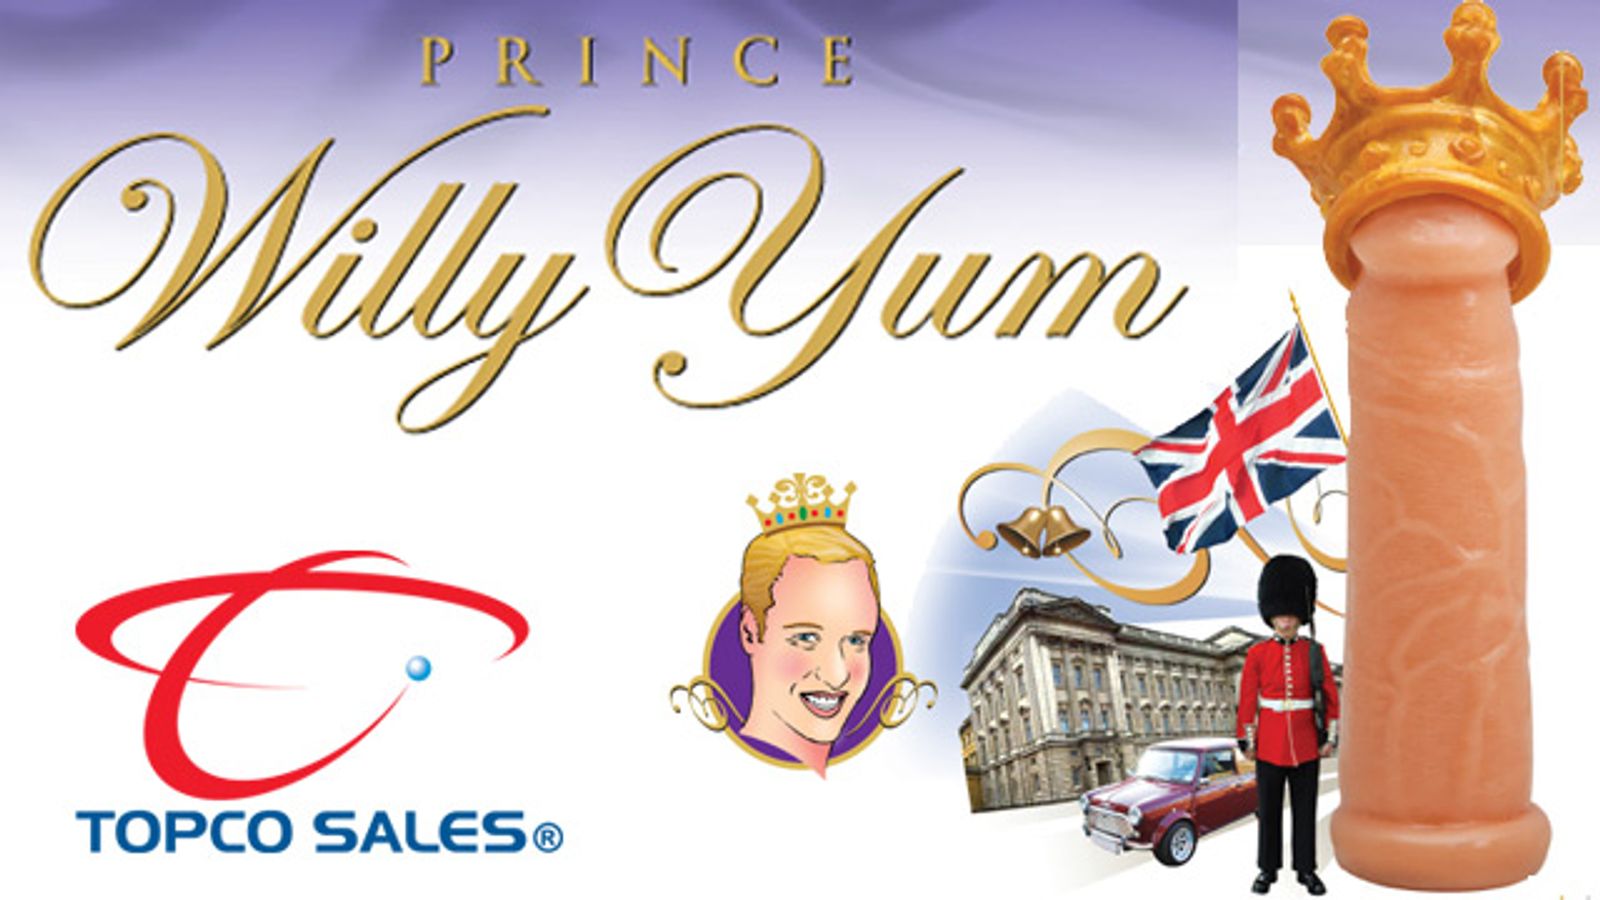 Topco Sales Releases Prince Willy Yum Dong